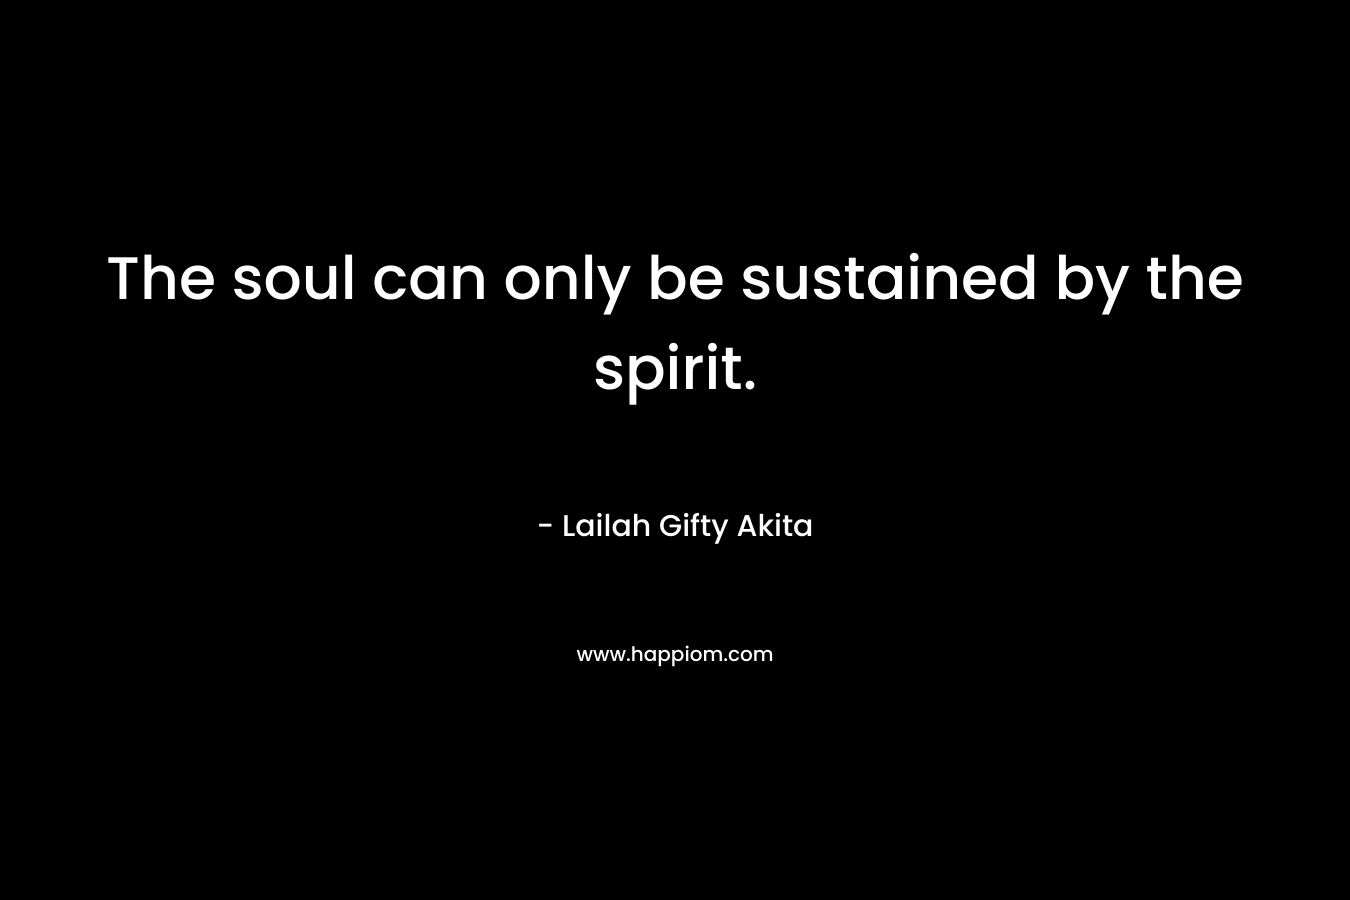 The soul can only be sustained by the spirit.